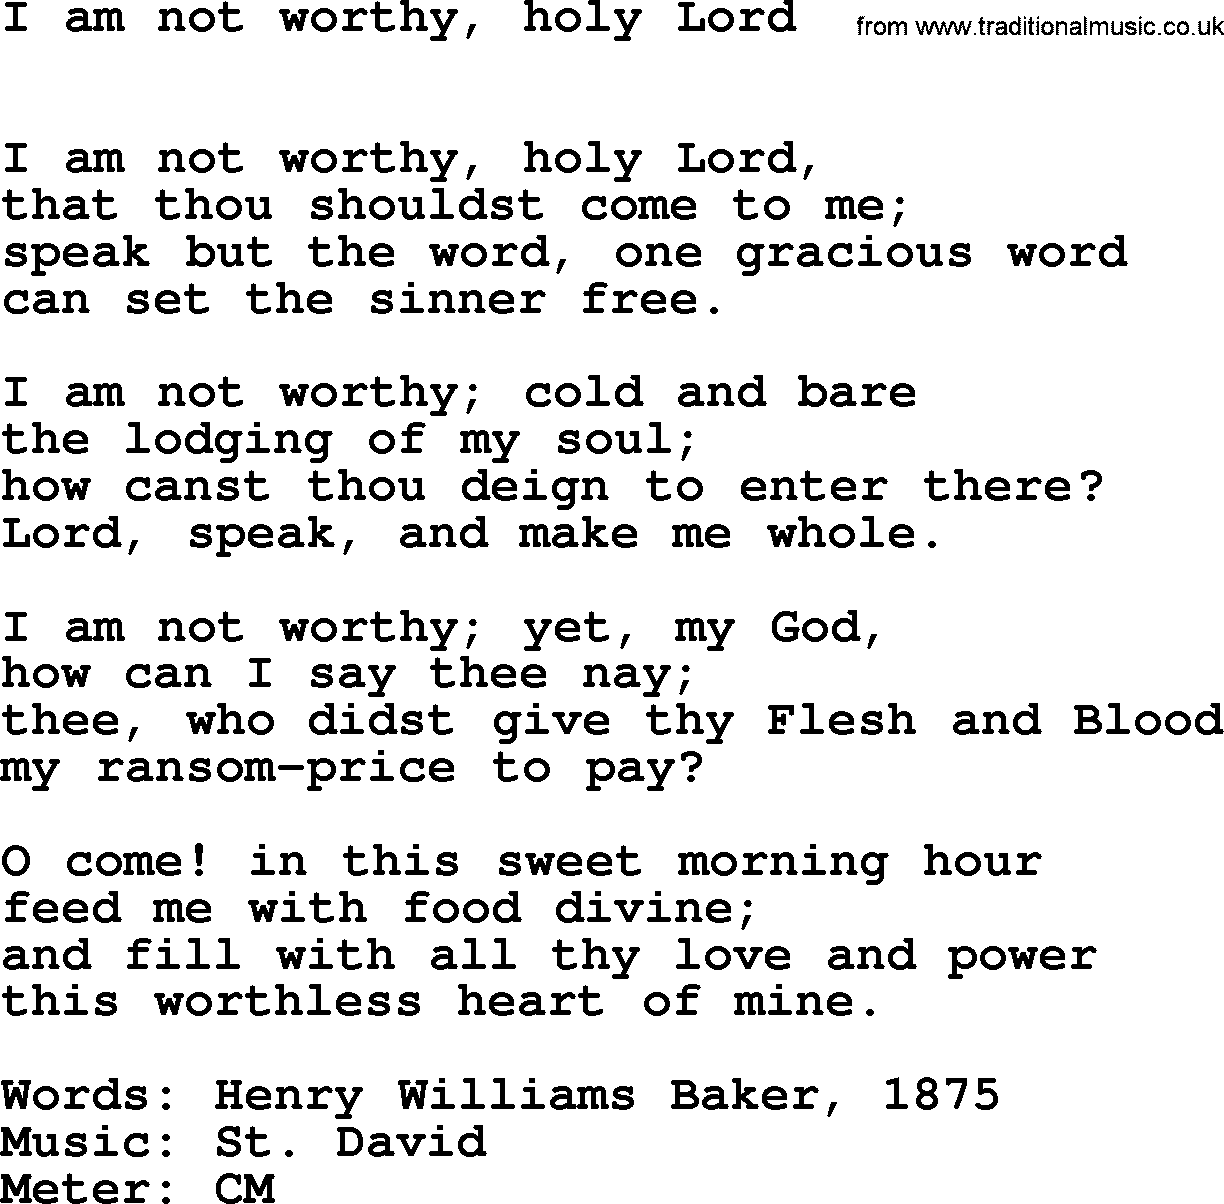 Book of Common Praise Hymn: I Am Not Worthy, Holy Lord.txt lyrics with midi music